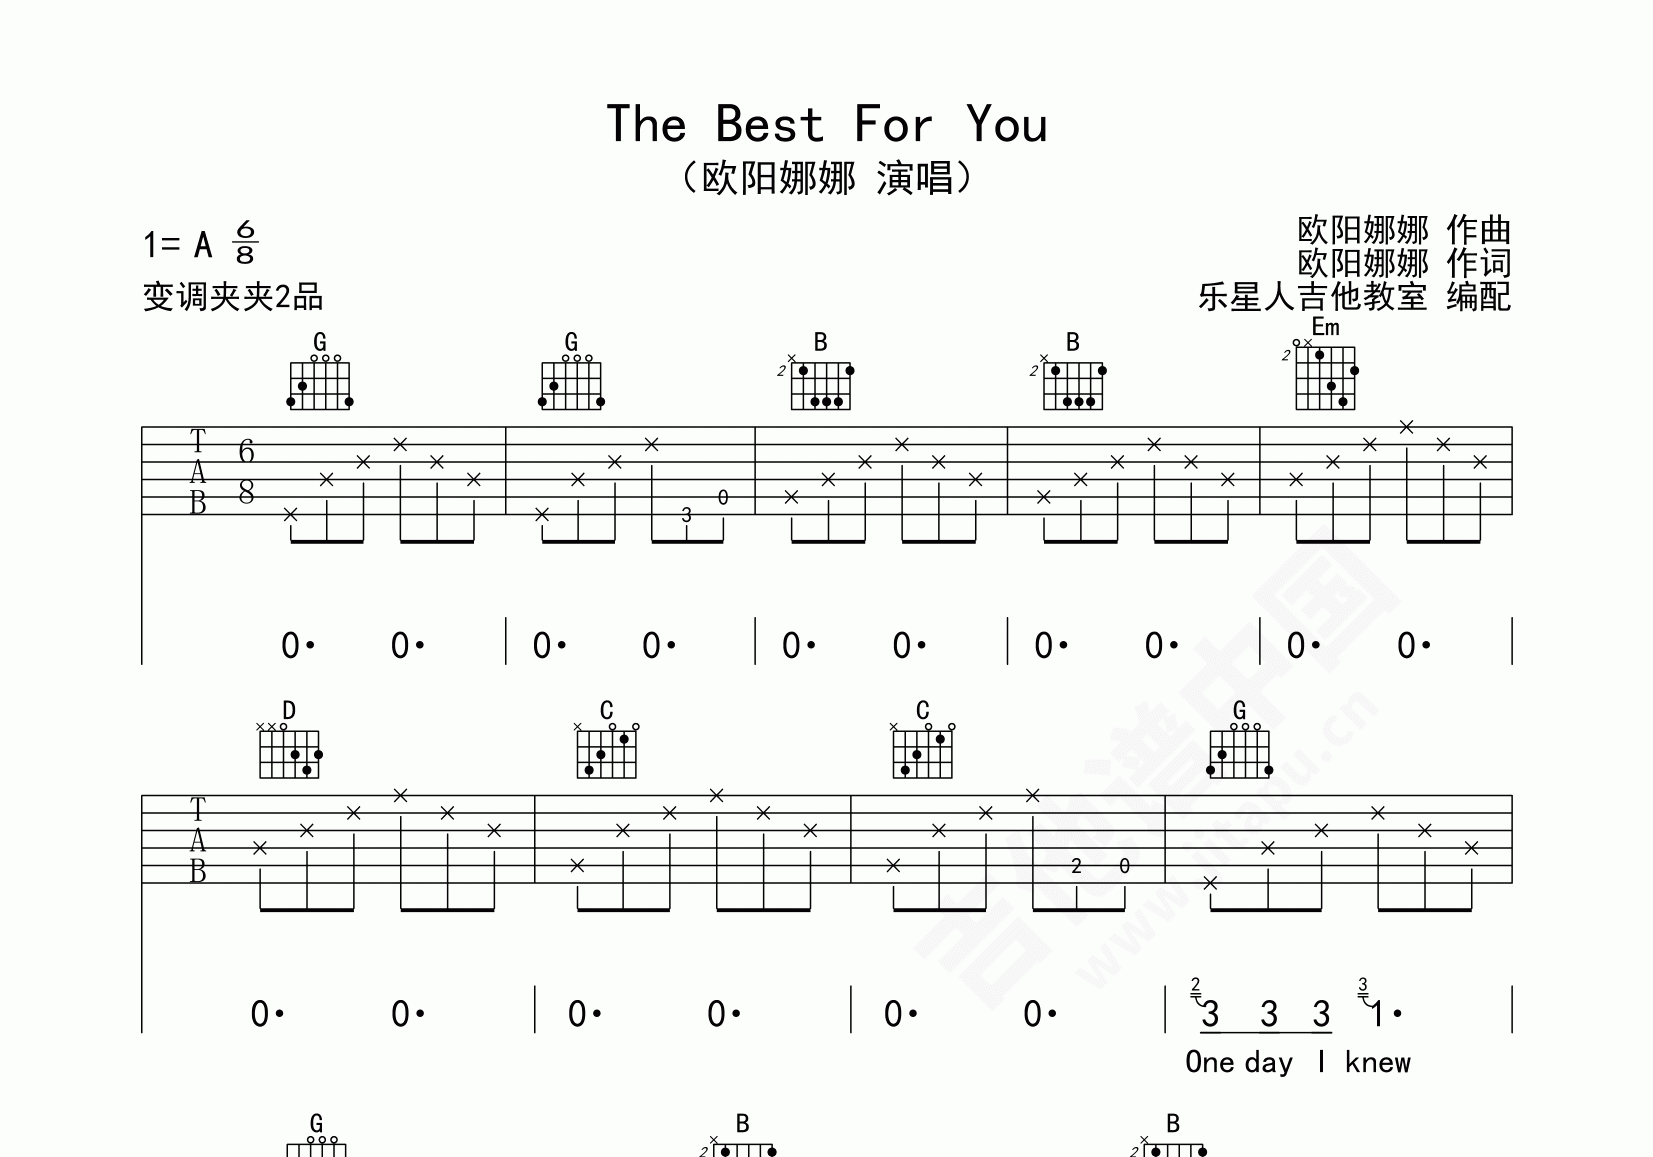 A Song For You And Me吉他谱 - jeff - C调吉他弹唱谱 - 琴谱网